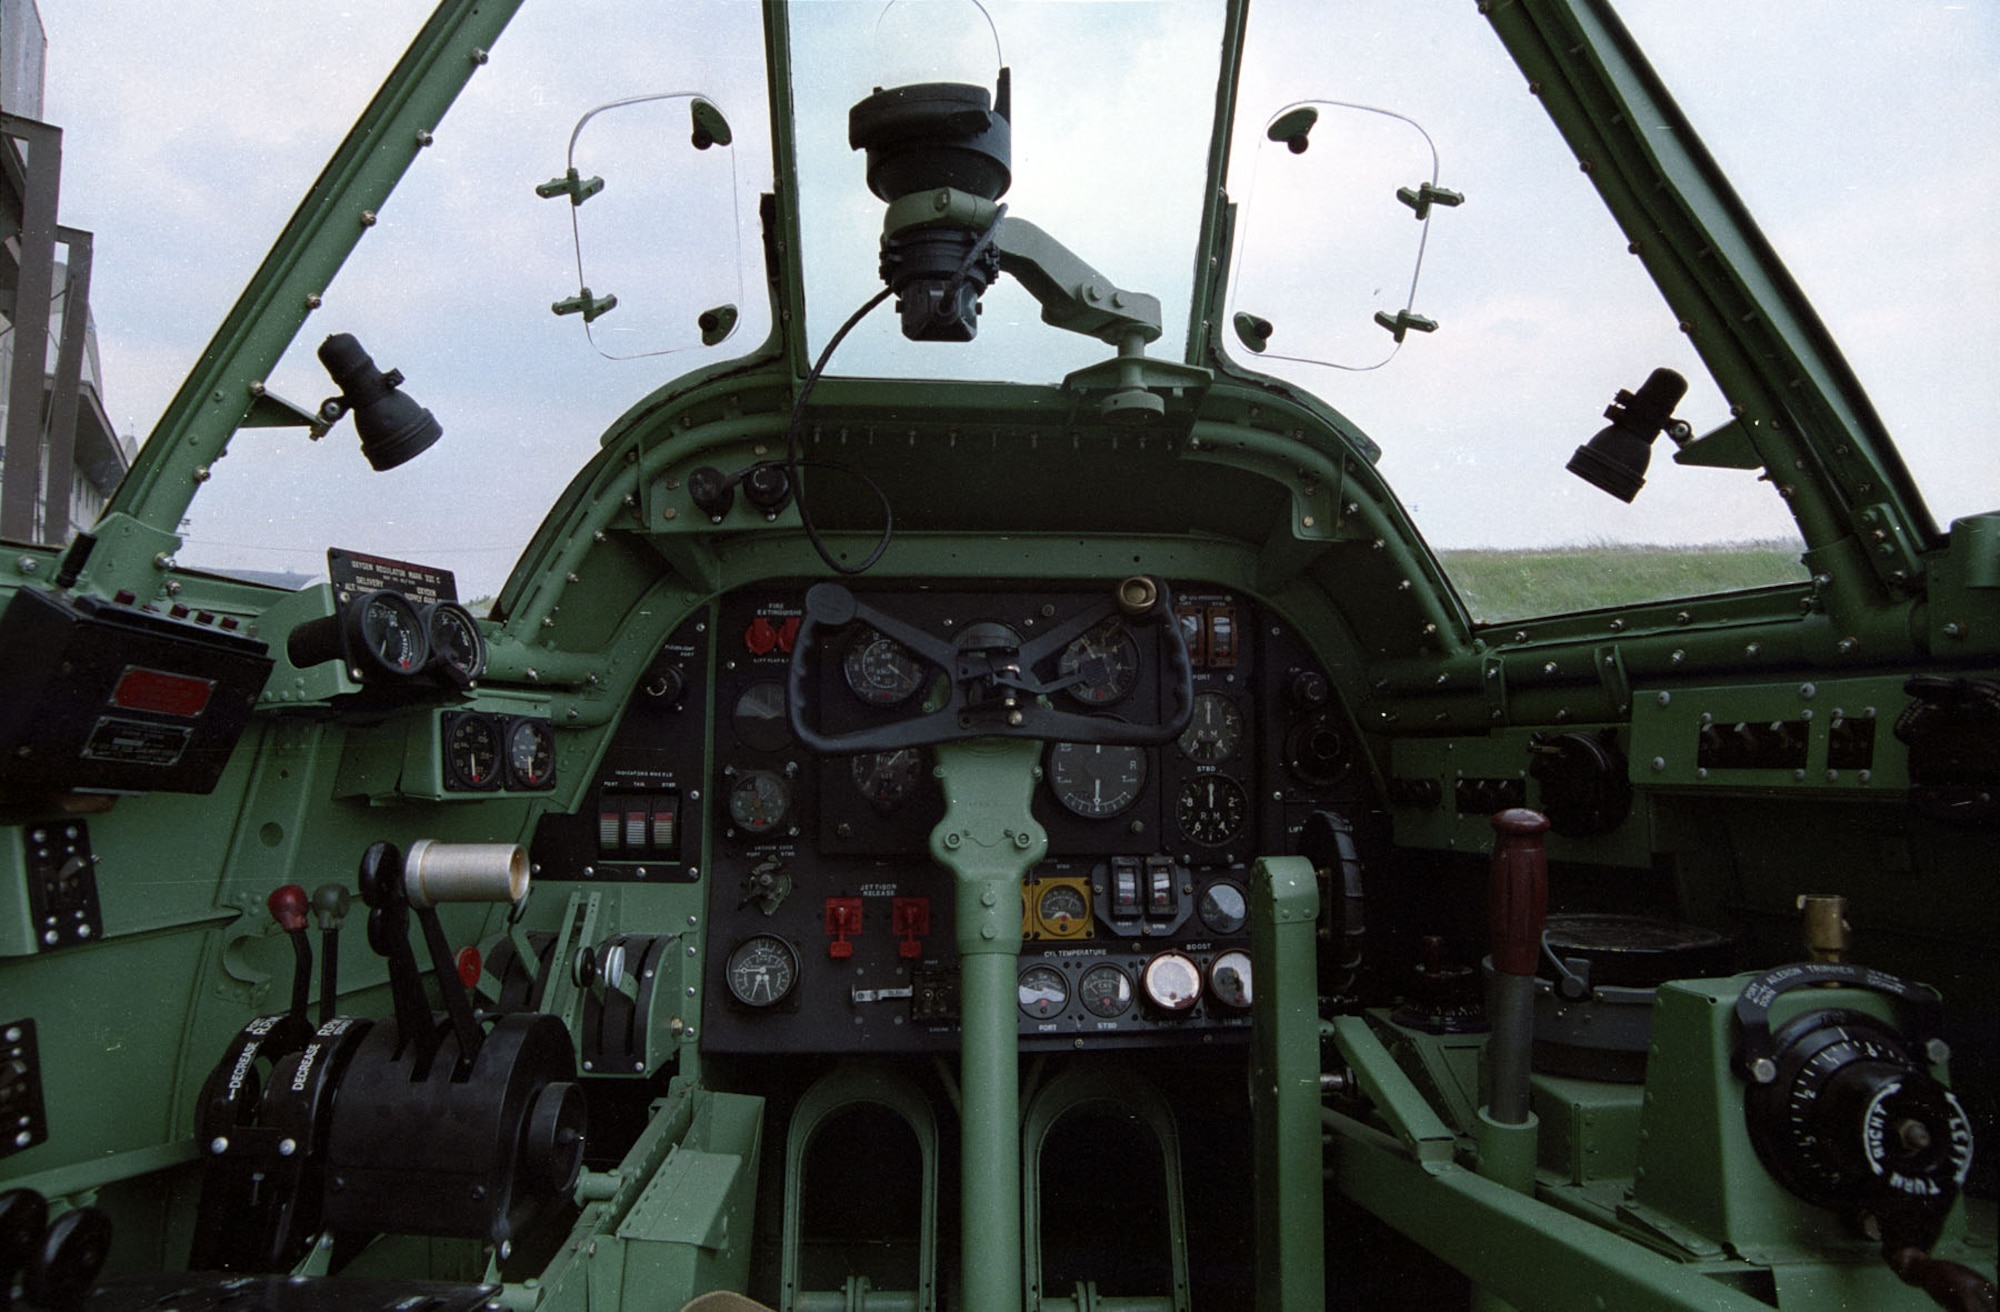 DAYTON, Ohio -- Bristol Beaufighter cockpit at the National Museum of the United States Air Force. (U.S. Air Force photo)